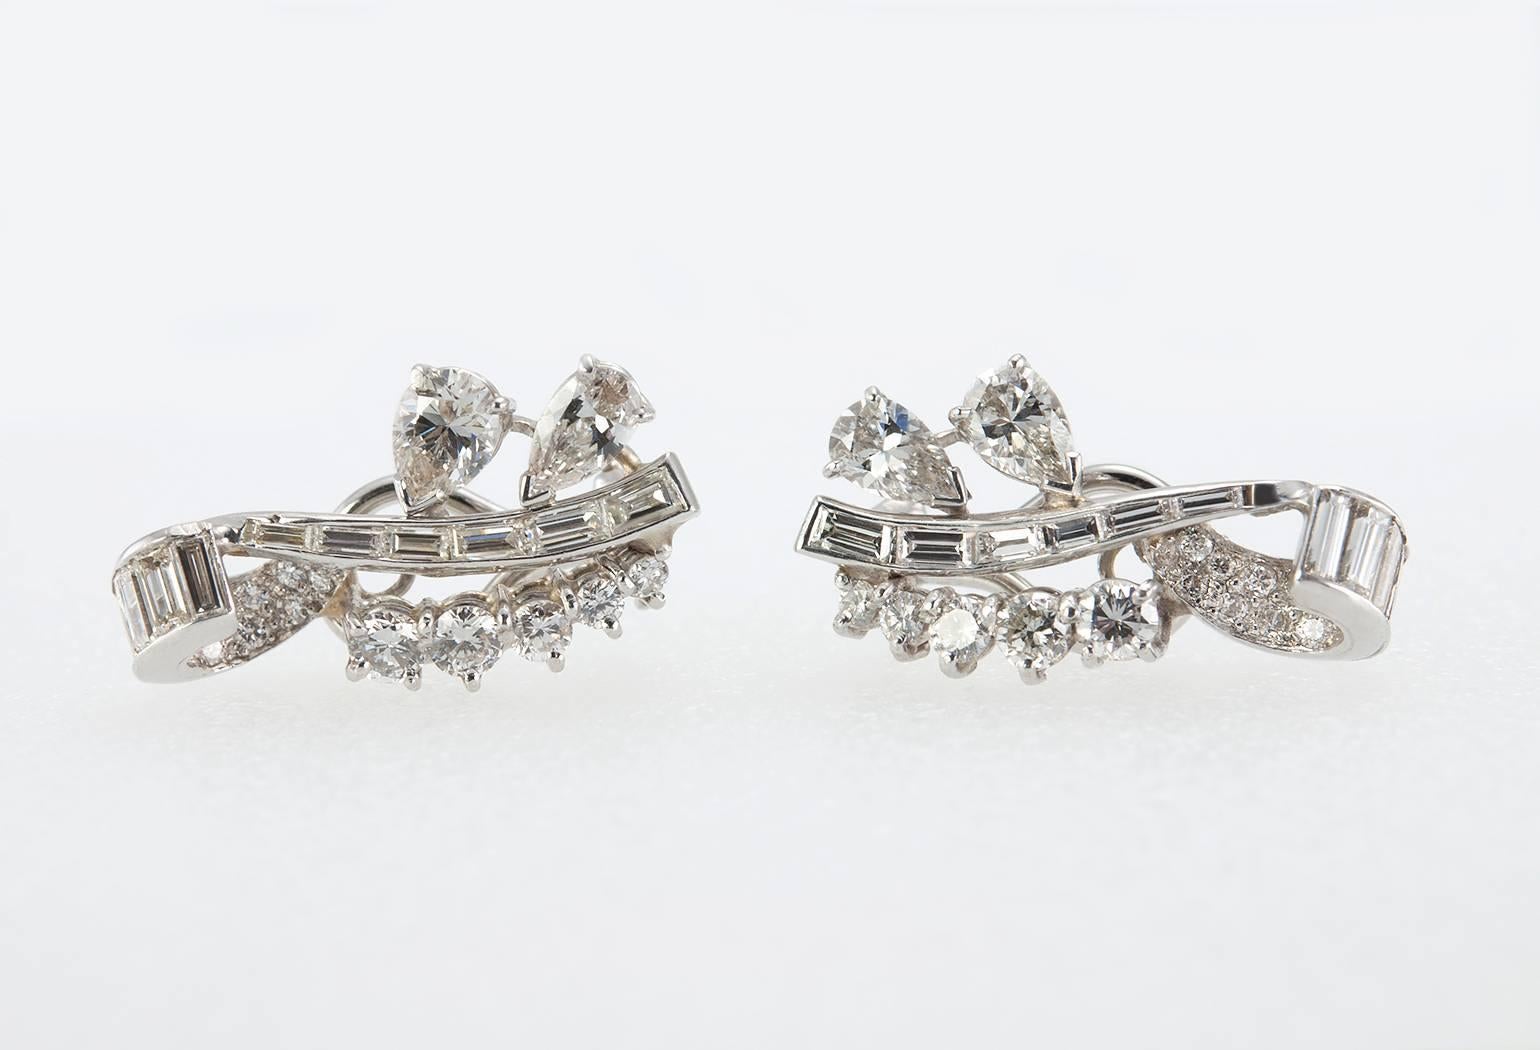 These beautiful diamond and platinum ear crawler earrings clip on and sit comfortably up the ear.  With approximately 3 carats in total diamond weight they really sparkle! The earrings consist of 28 round brilliant cut diamonds, 4 pear shaped